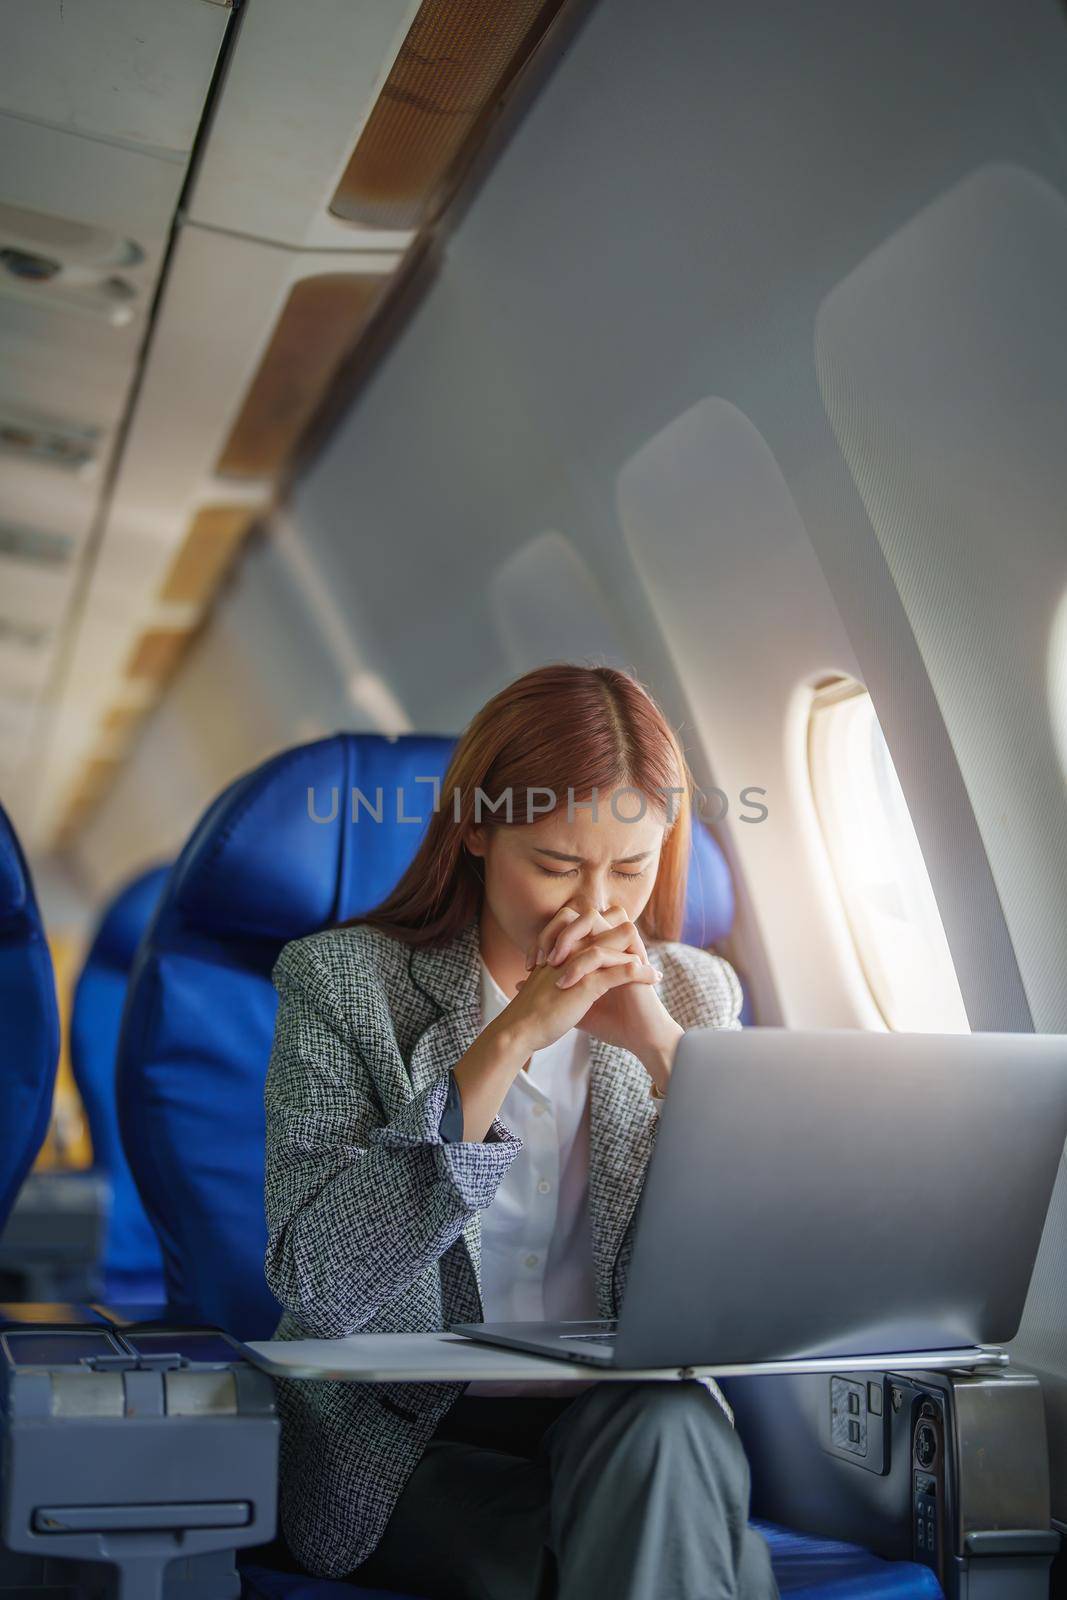 portrait of a successful Asian businesswoman or entrepreneur in a formal suit on an airplane seated in Business Class shows a thoughtful and stressed face with using laptop during the flight.